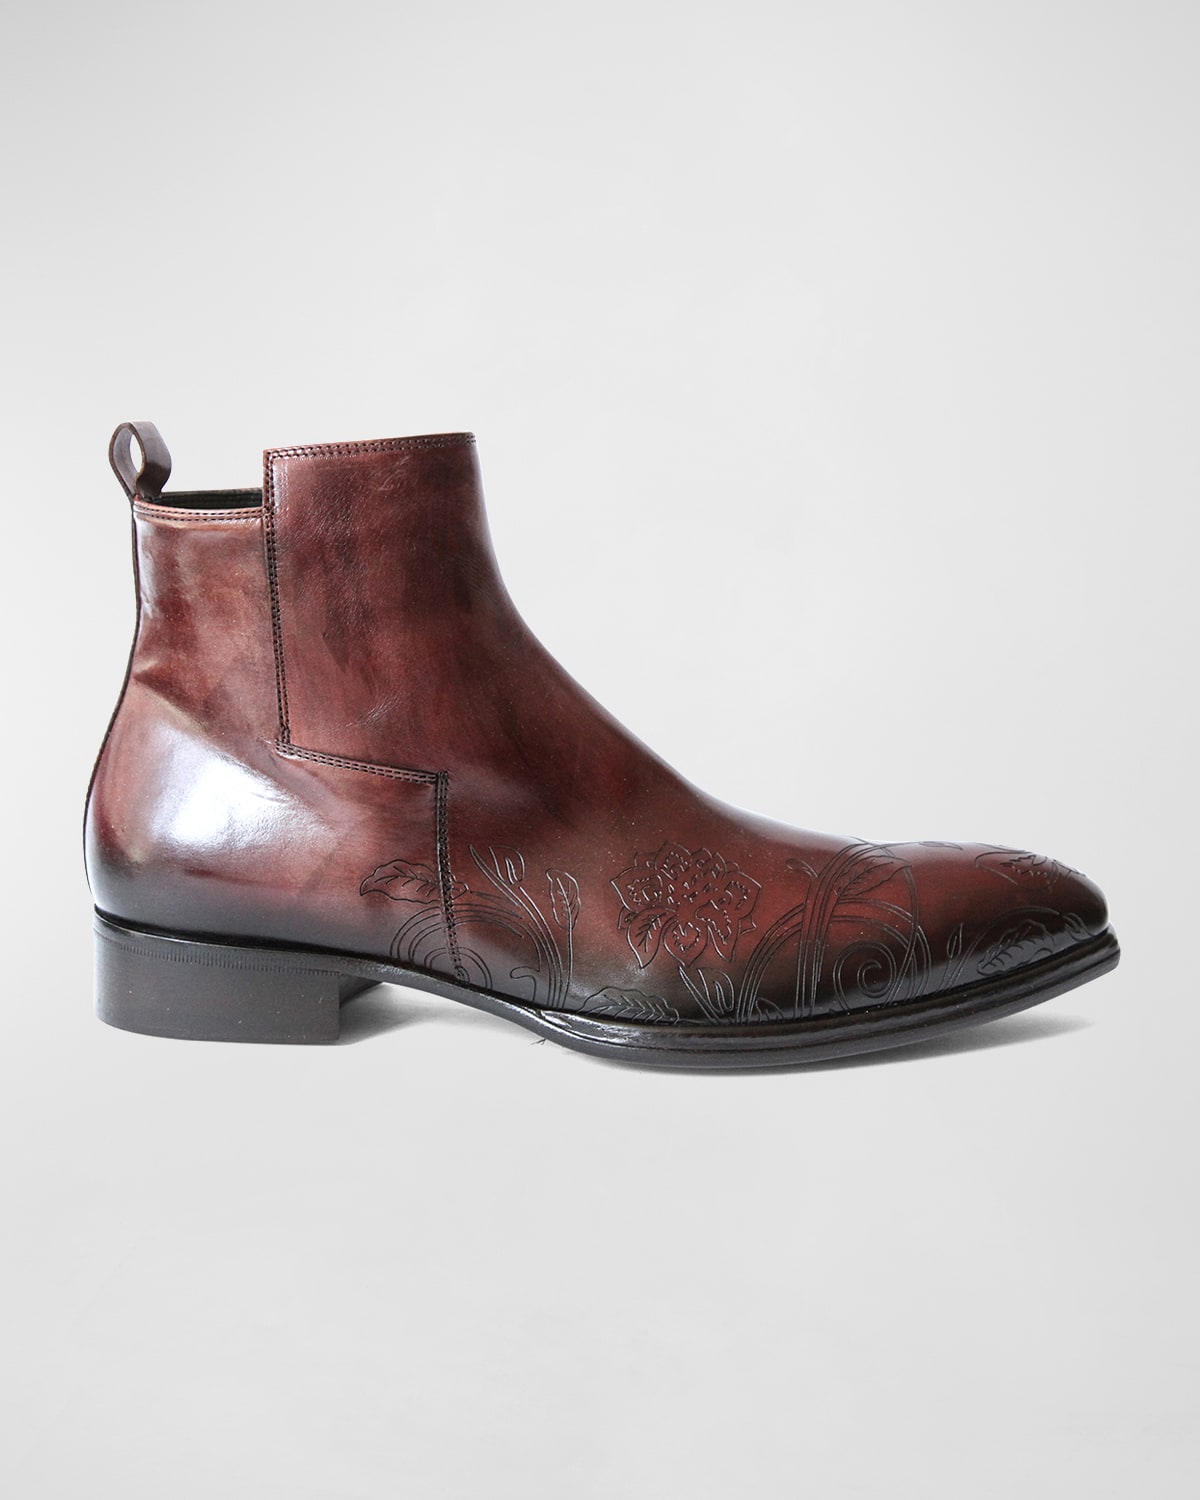 Jo Ghost Men's Burnished Woven Chelsea Boots | Neiman Marcus